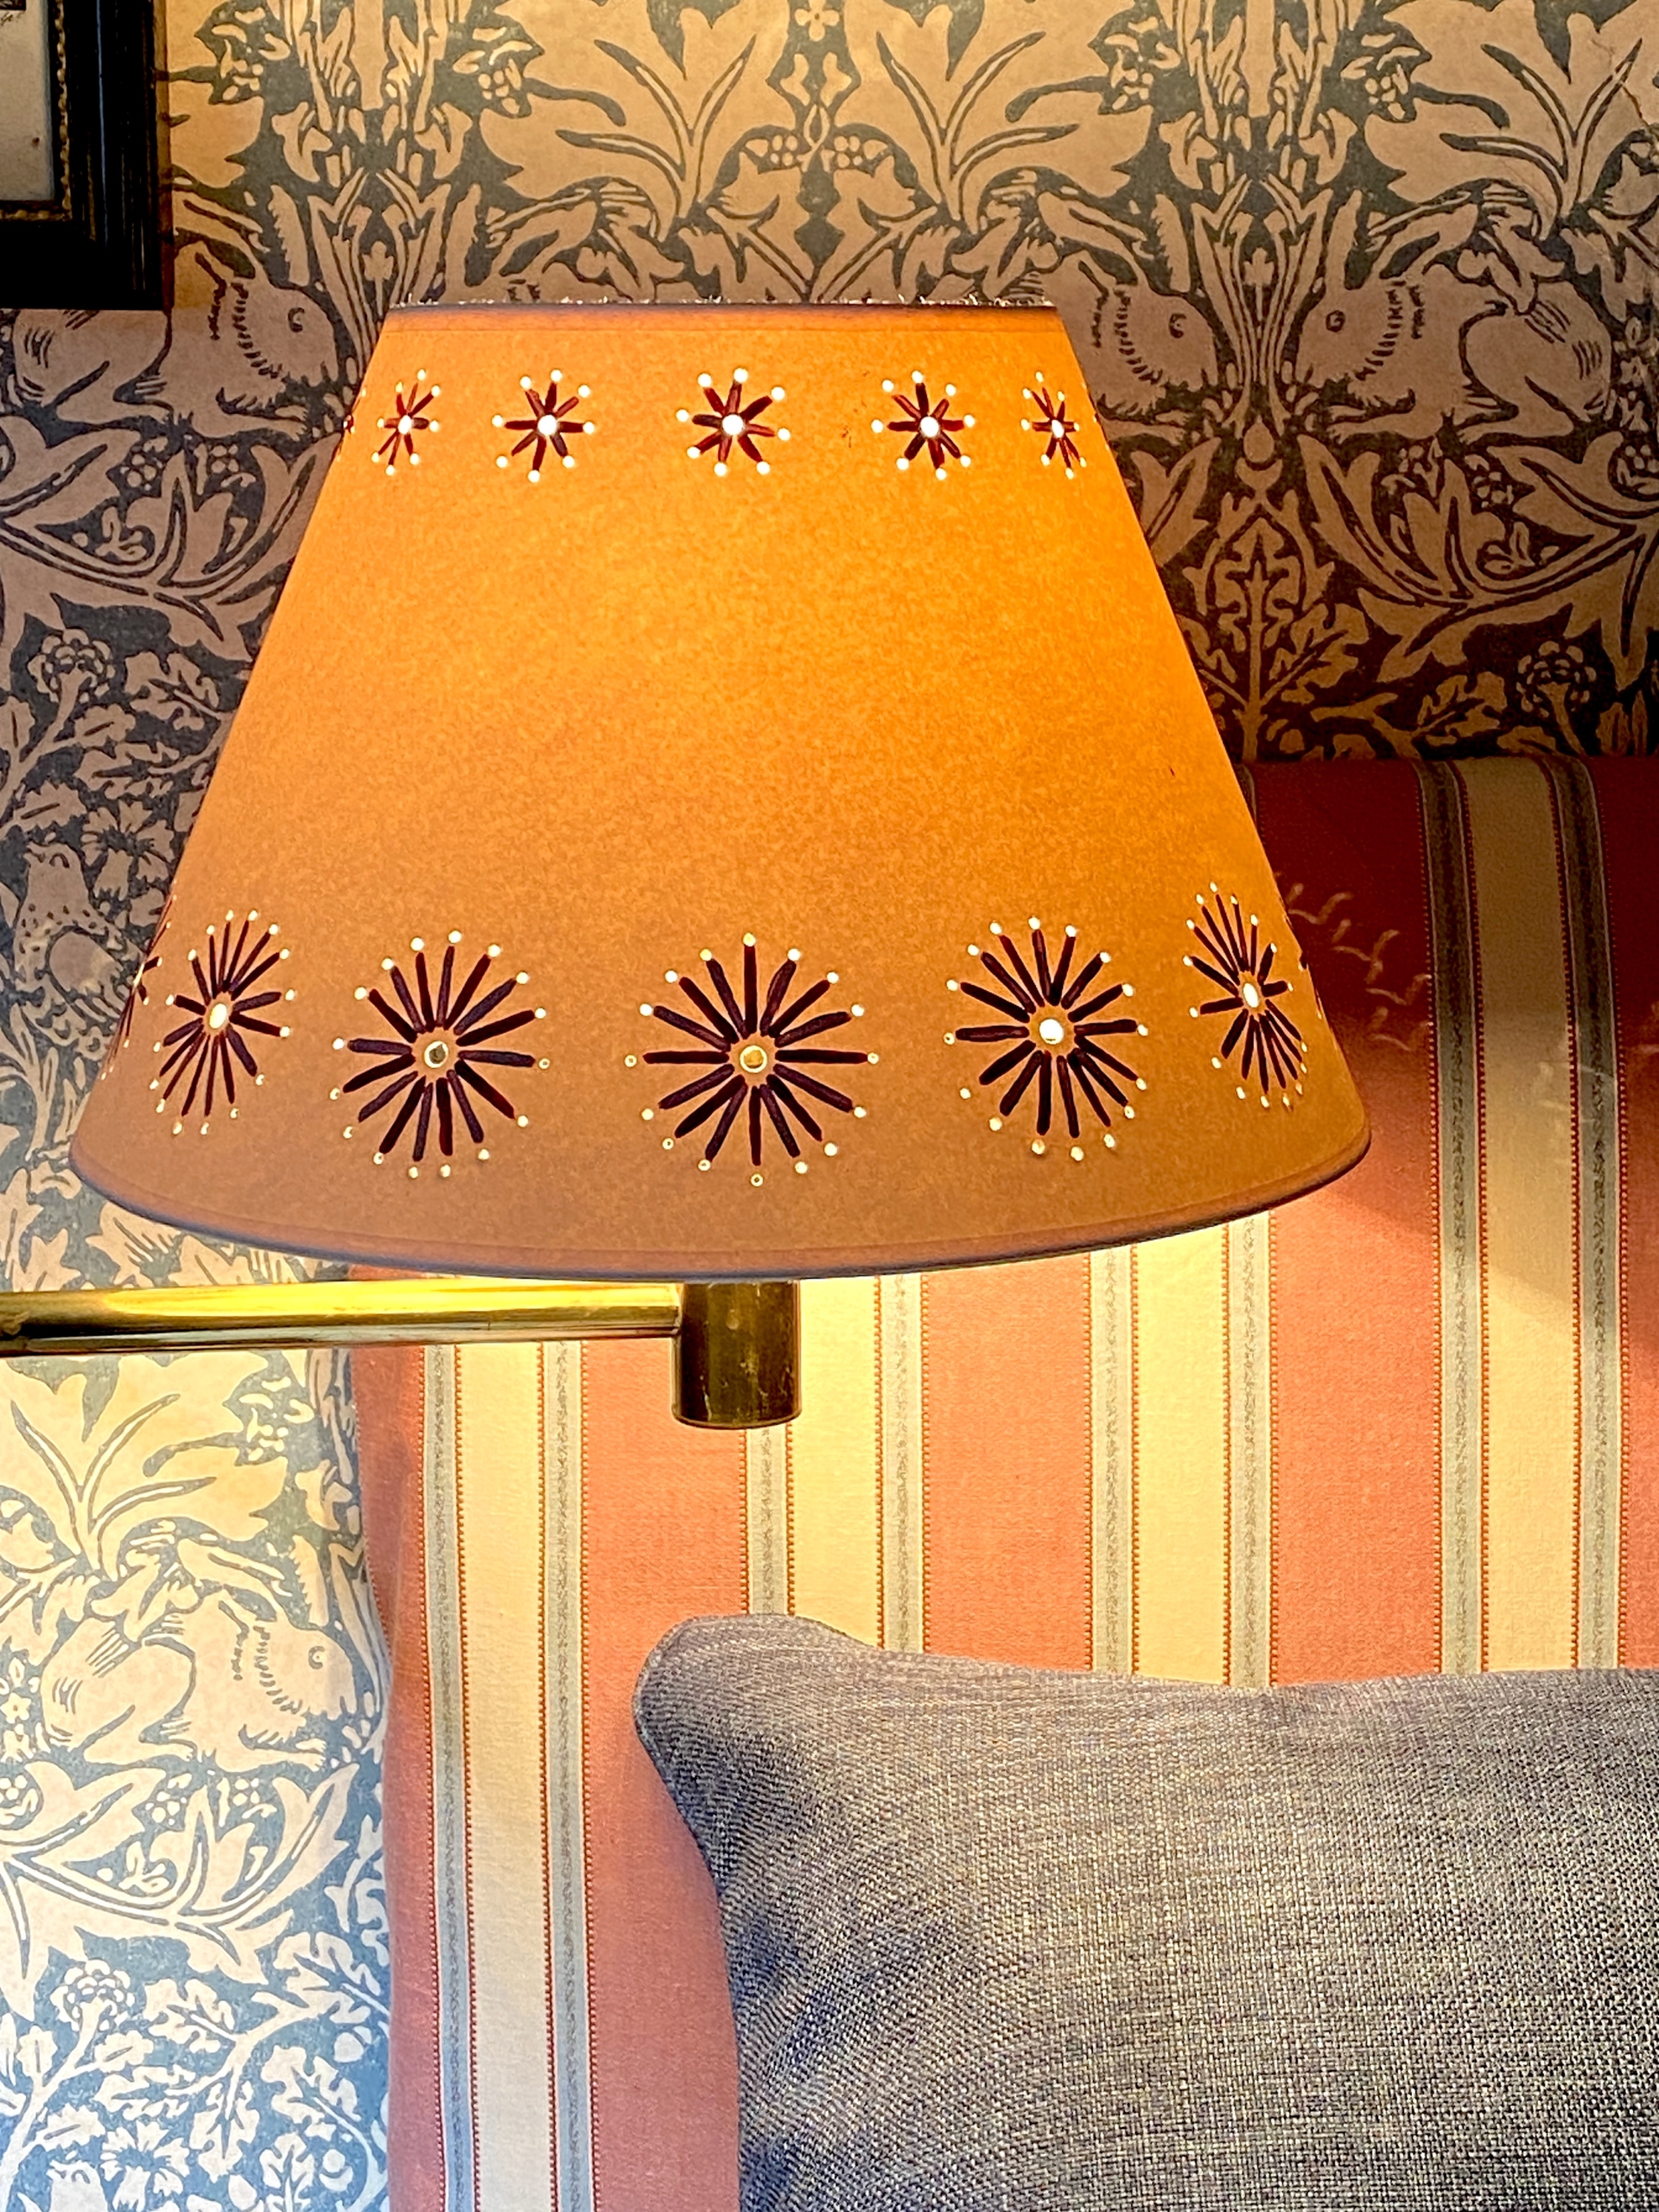 The 'Fireworks' Lampshade